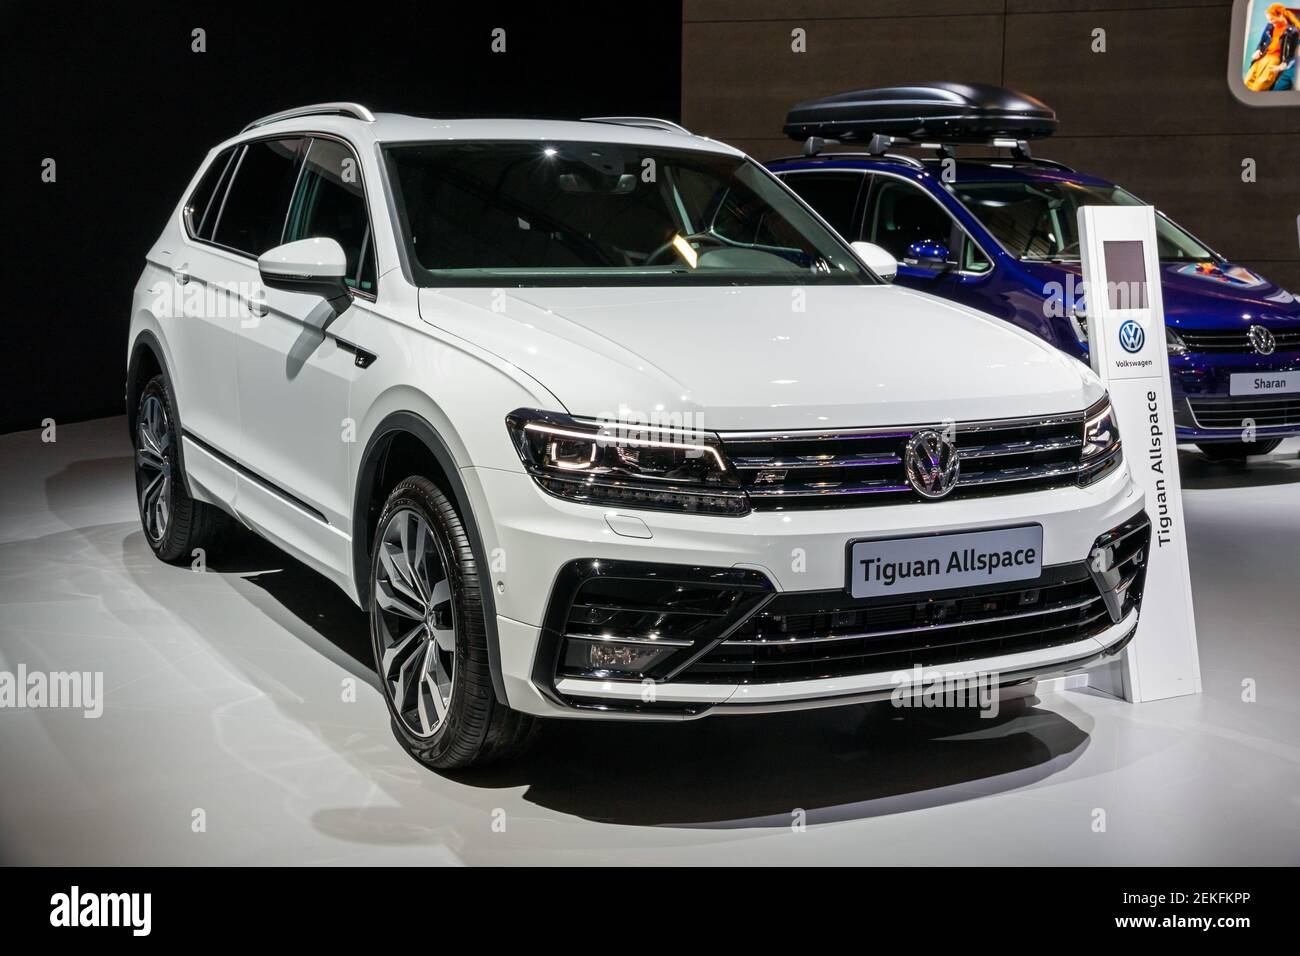 Volkswagen Tiguan Allspace car showcased at the Brussels Autosalon Motor Show. Belgium - January 18, 2019. Stock Photo